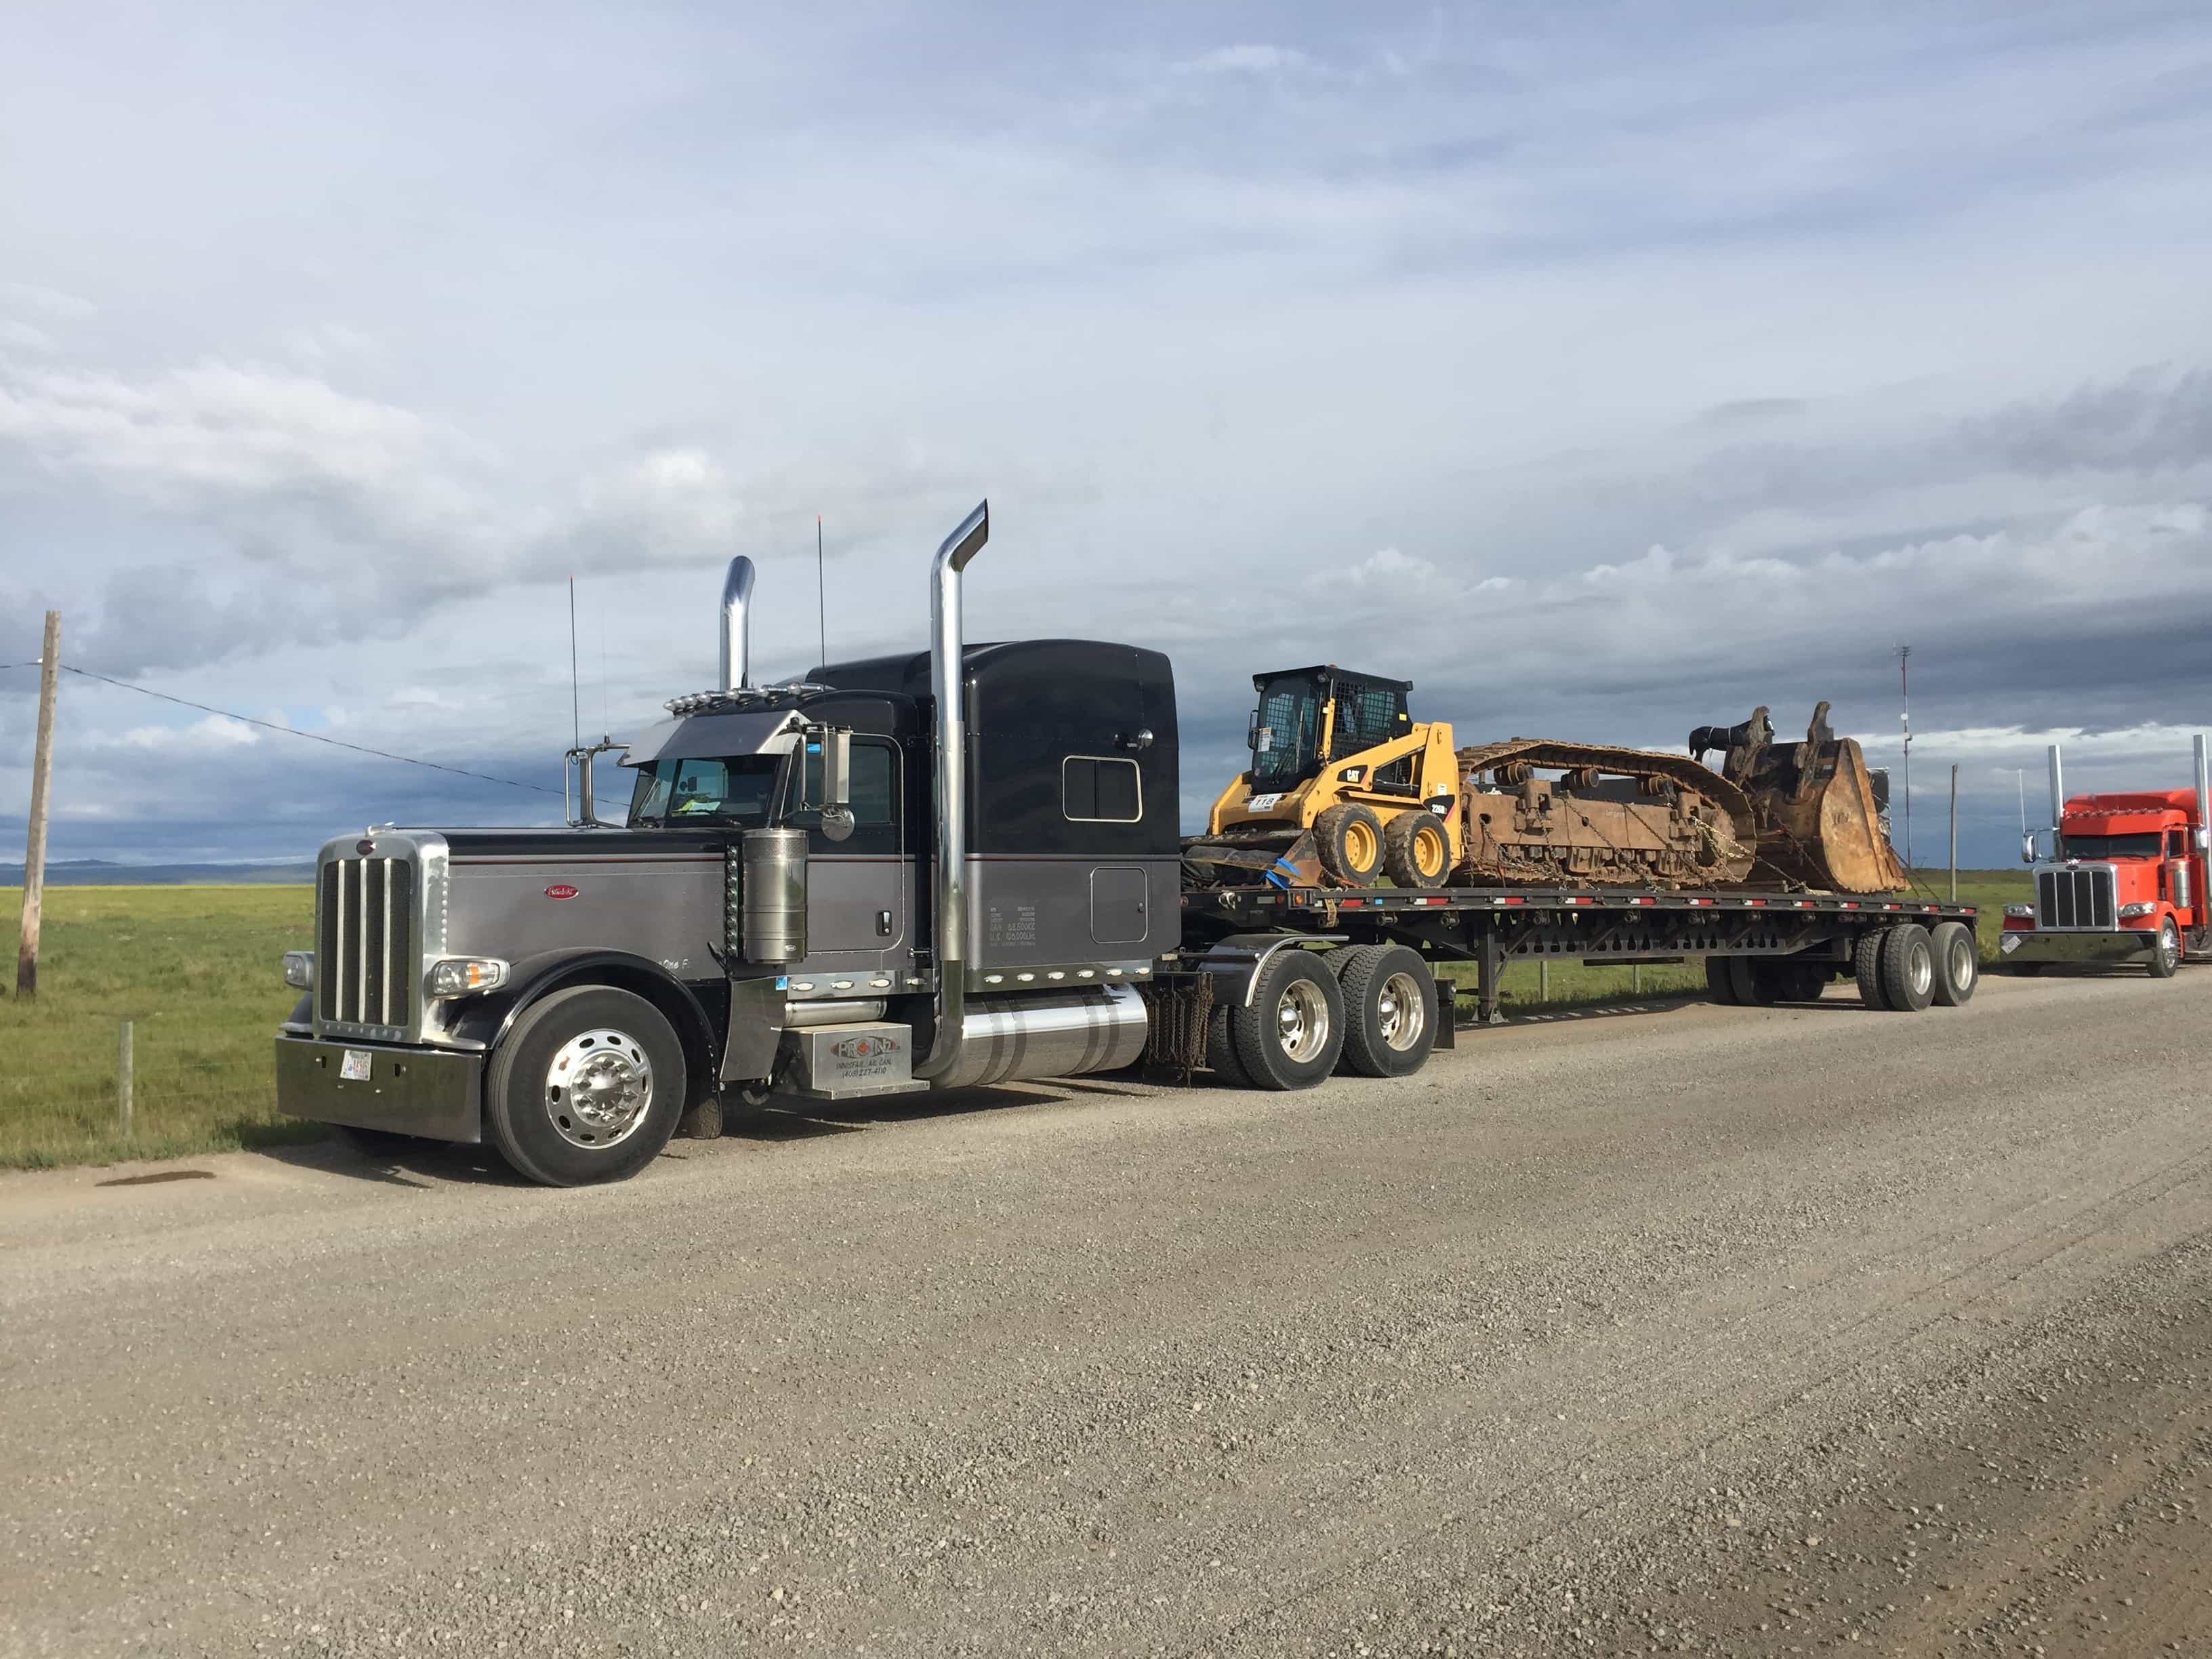 A truck using a flat bed to haul a small bulldozer and parts of another construction vehicle